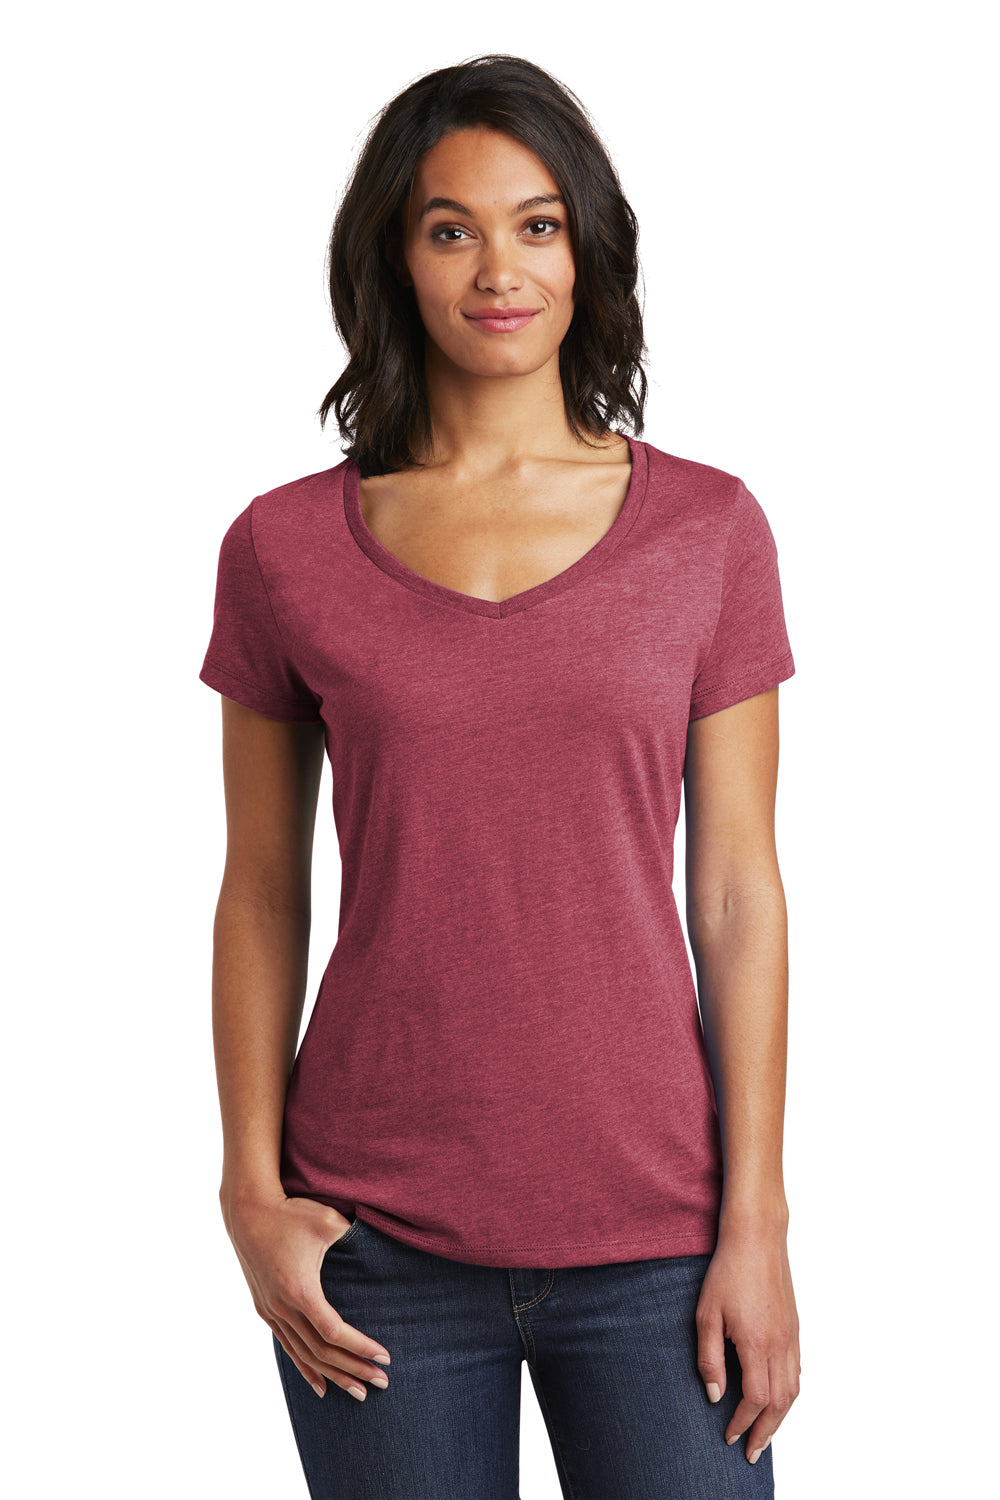 District DT6503 Womens Very Important Short Sleeve V-Neck T-Shirt Heather Cardinal Red Front